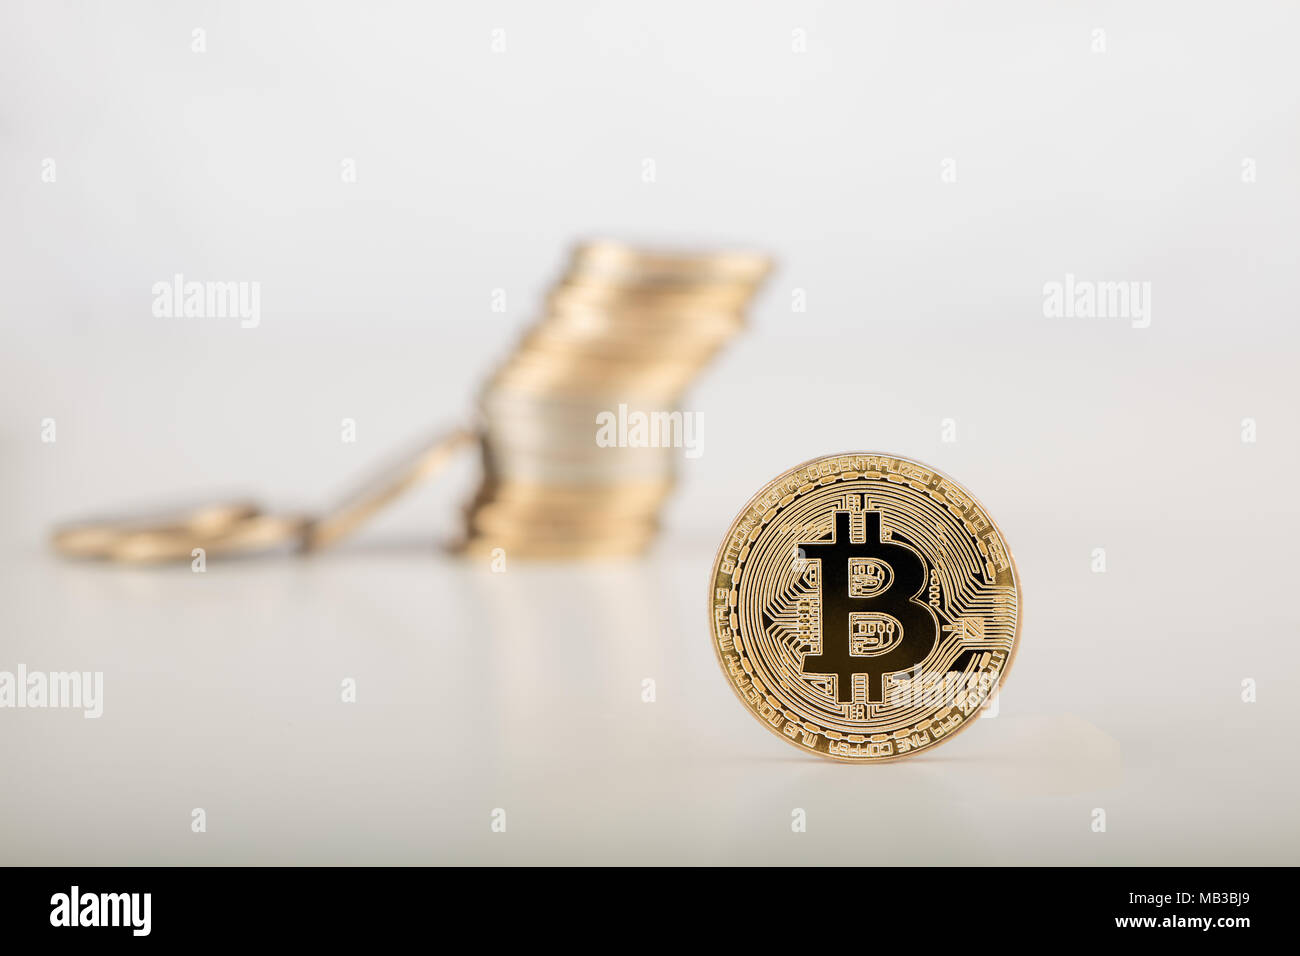 Golden bitcoin with money bitcoins background. Bit coin cryptocurrency banking money transfer business technology Stock Photo